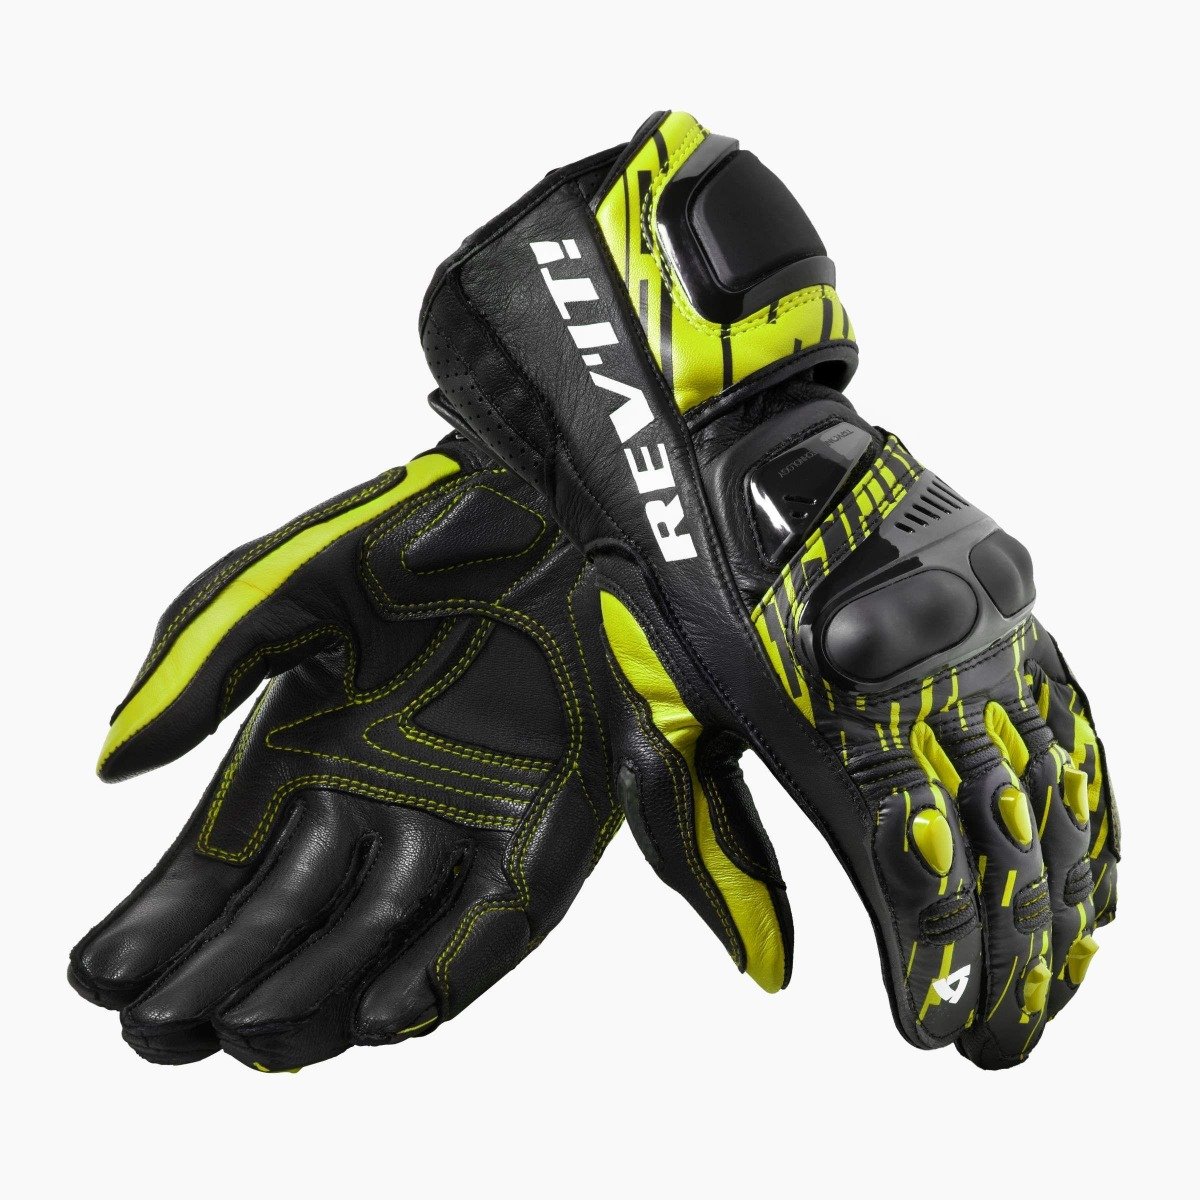 Image of REV'IT! Quantum 2 Neon Yellow Black Motorcycle Gloves Size XL ID 8700001308861